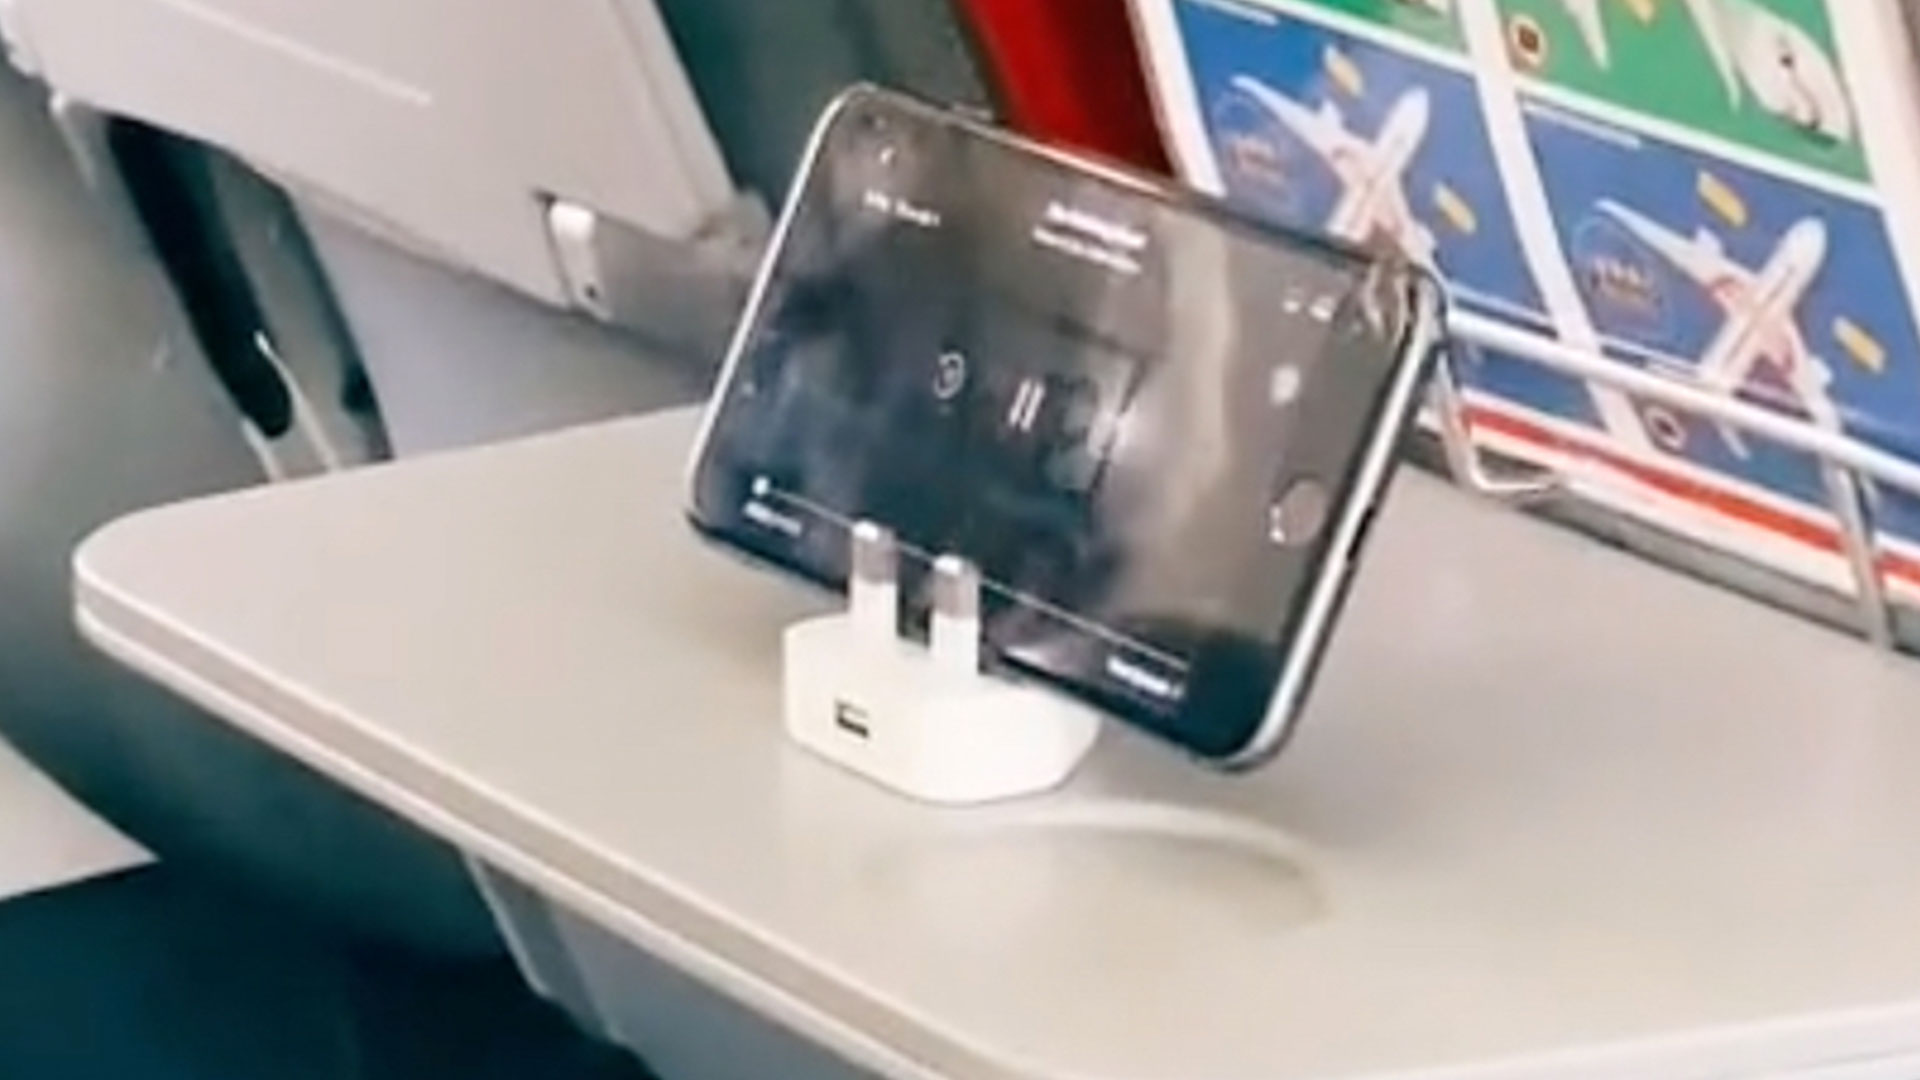 A man is labelled “lifesaver” for his clever way to watch movies on your phone while flying